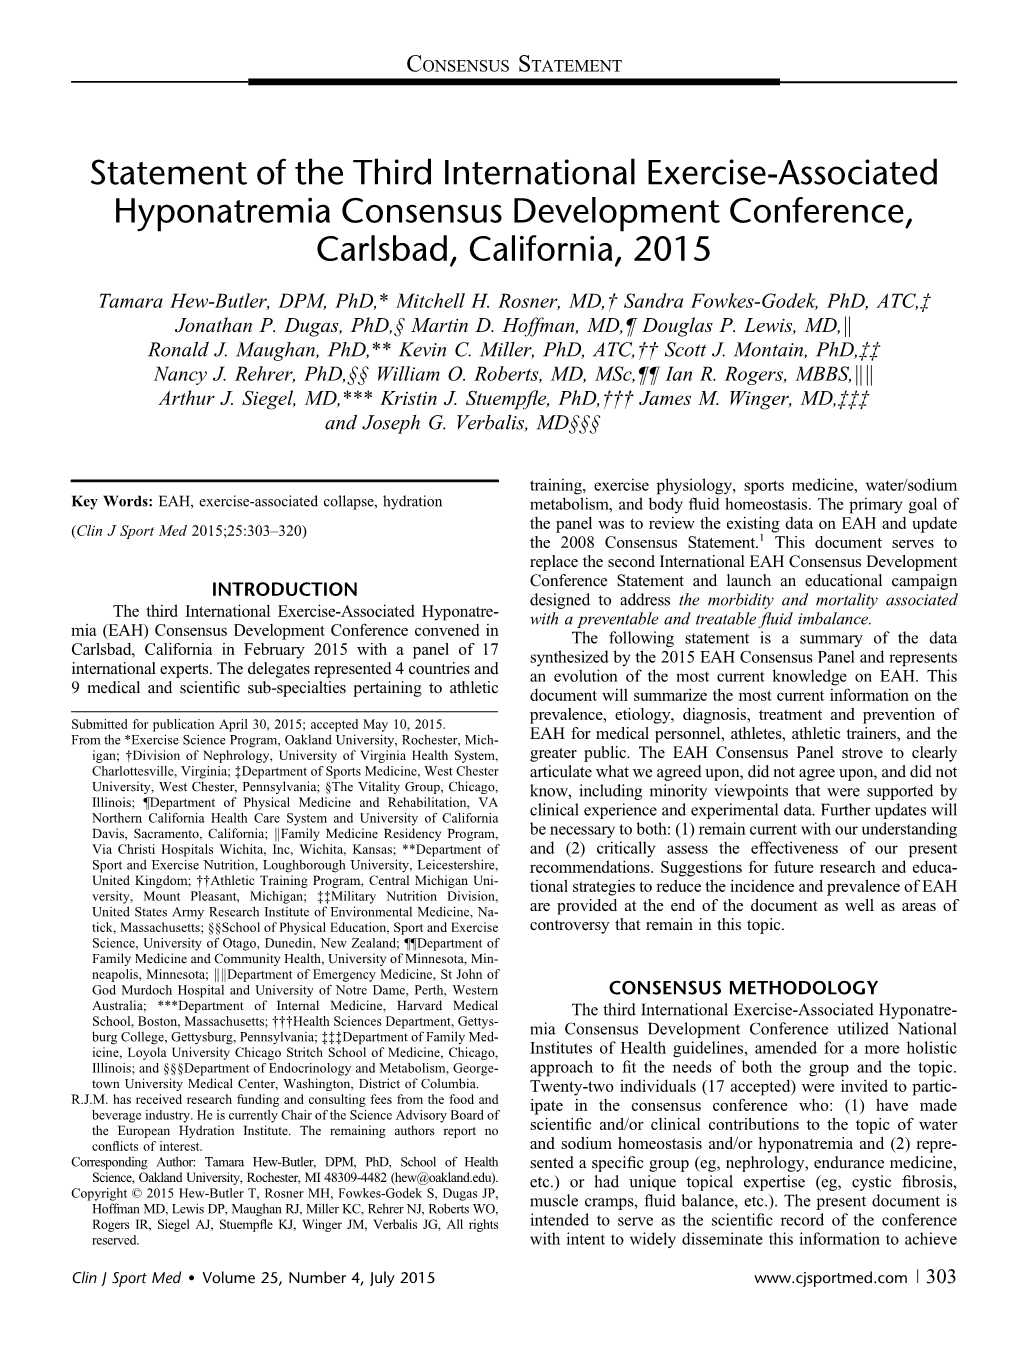 Statement of the Third International Exercise-Associated Hyponatremia Consensus Development Conference, Carlsbad, California, 2015